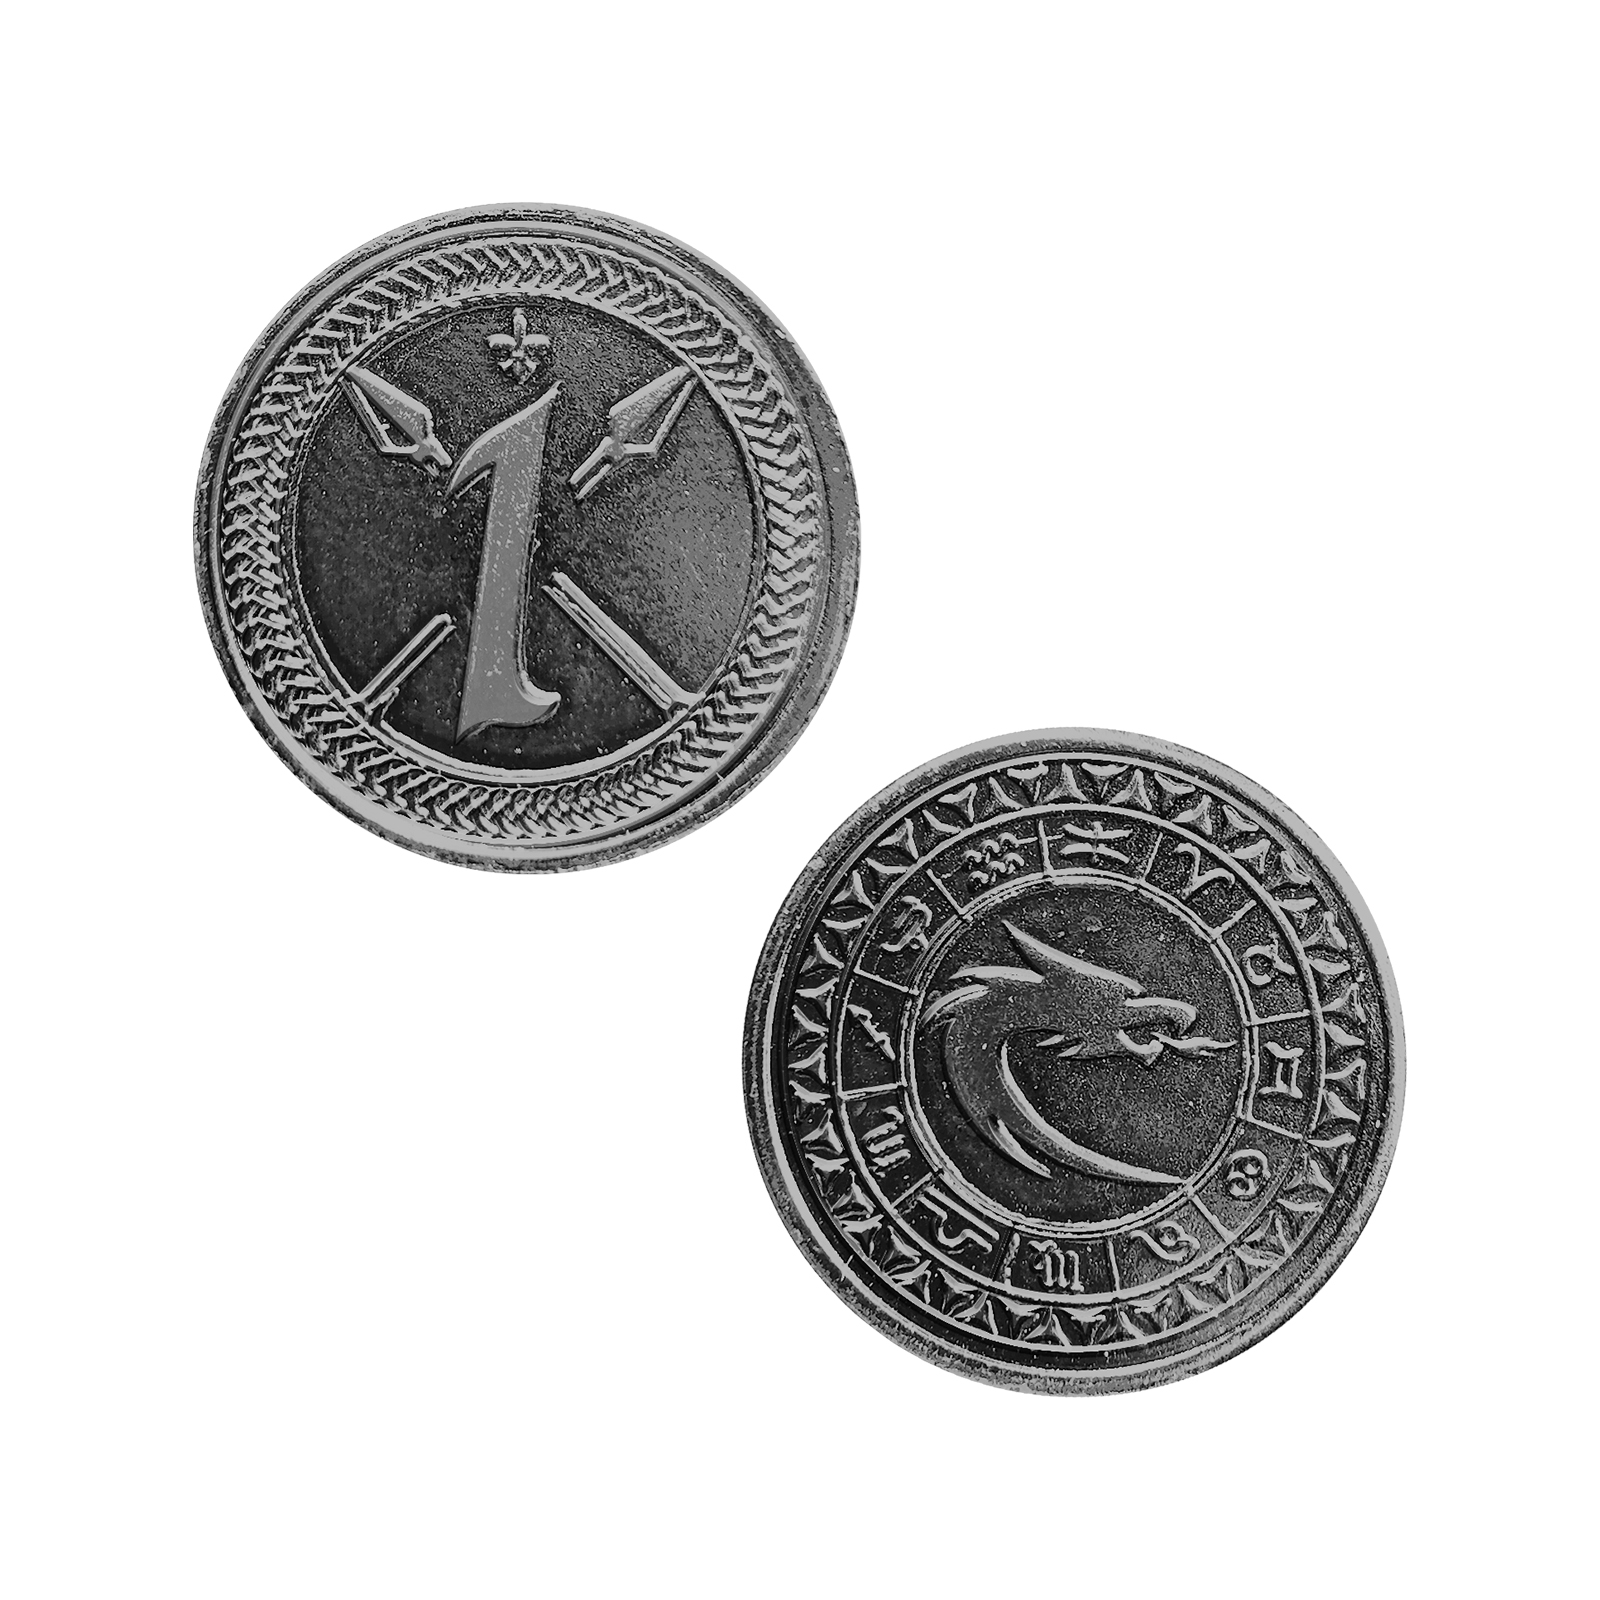 Real Metal Coins With Dragon Design for D&D TTRPGS LARP 